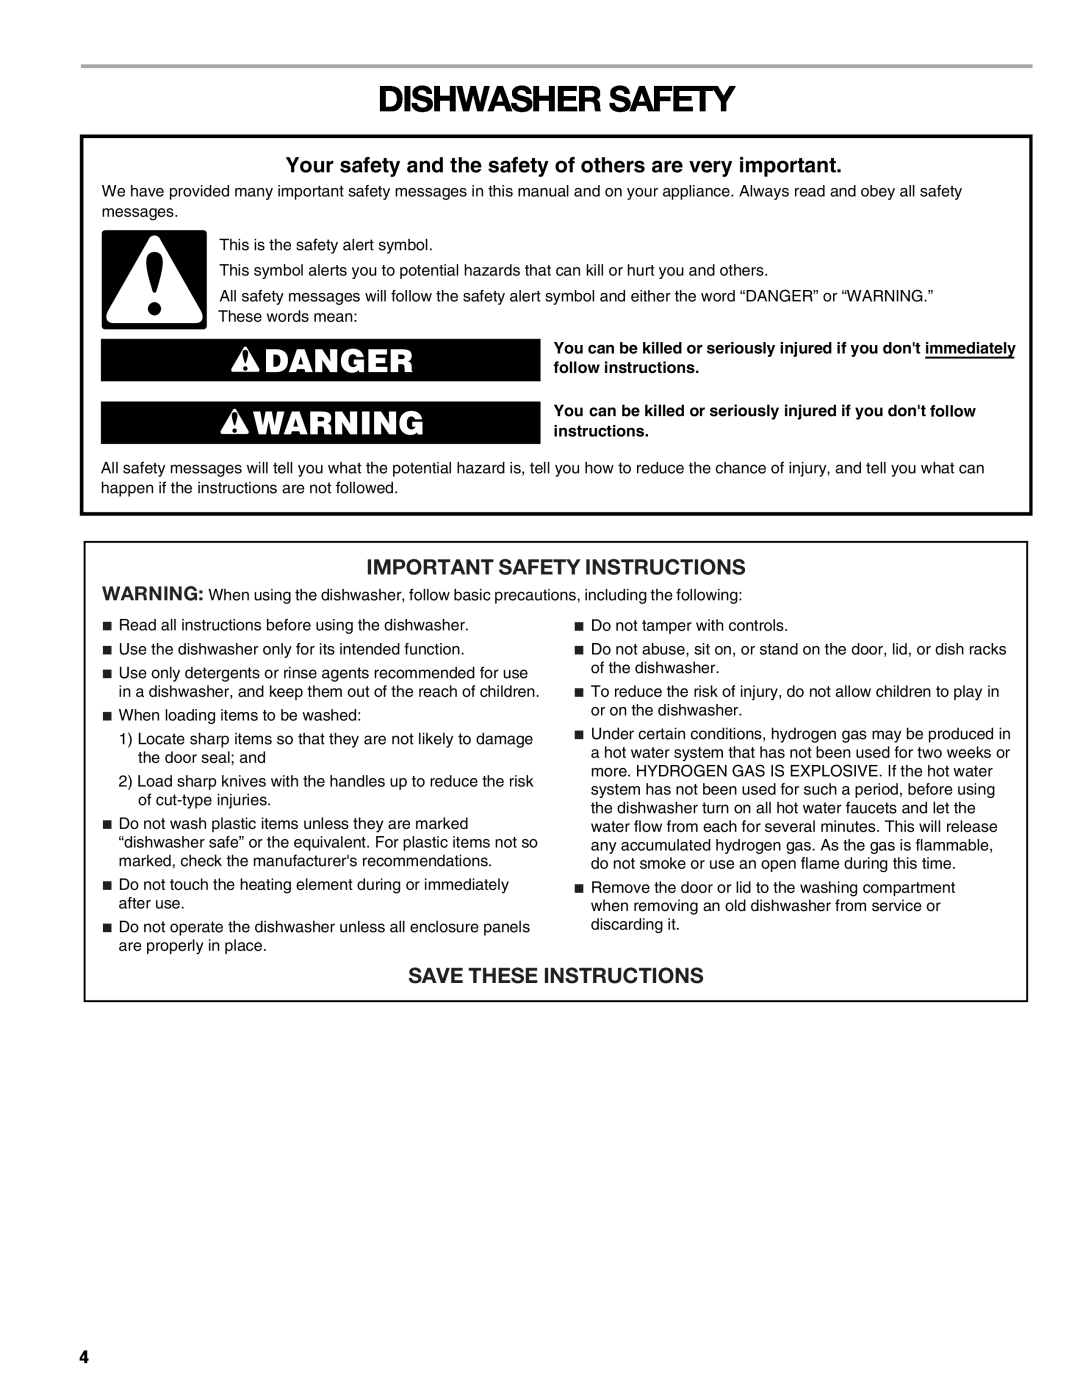 Sears 665.1359, 665.1369 manual Dishwasher Safety, Danger, Important Safety Instructions, Save These Instructions 